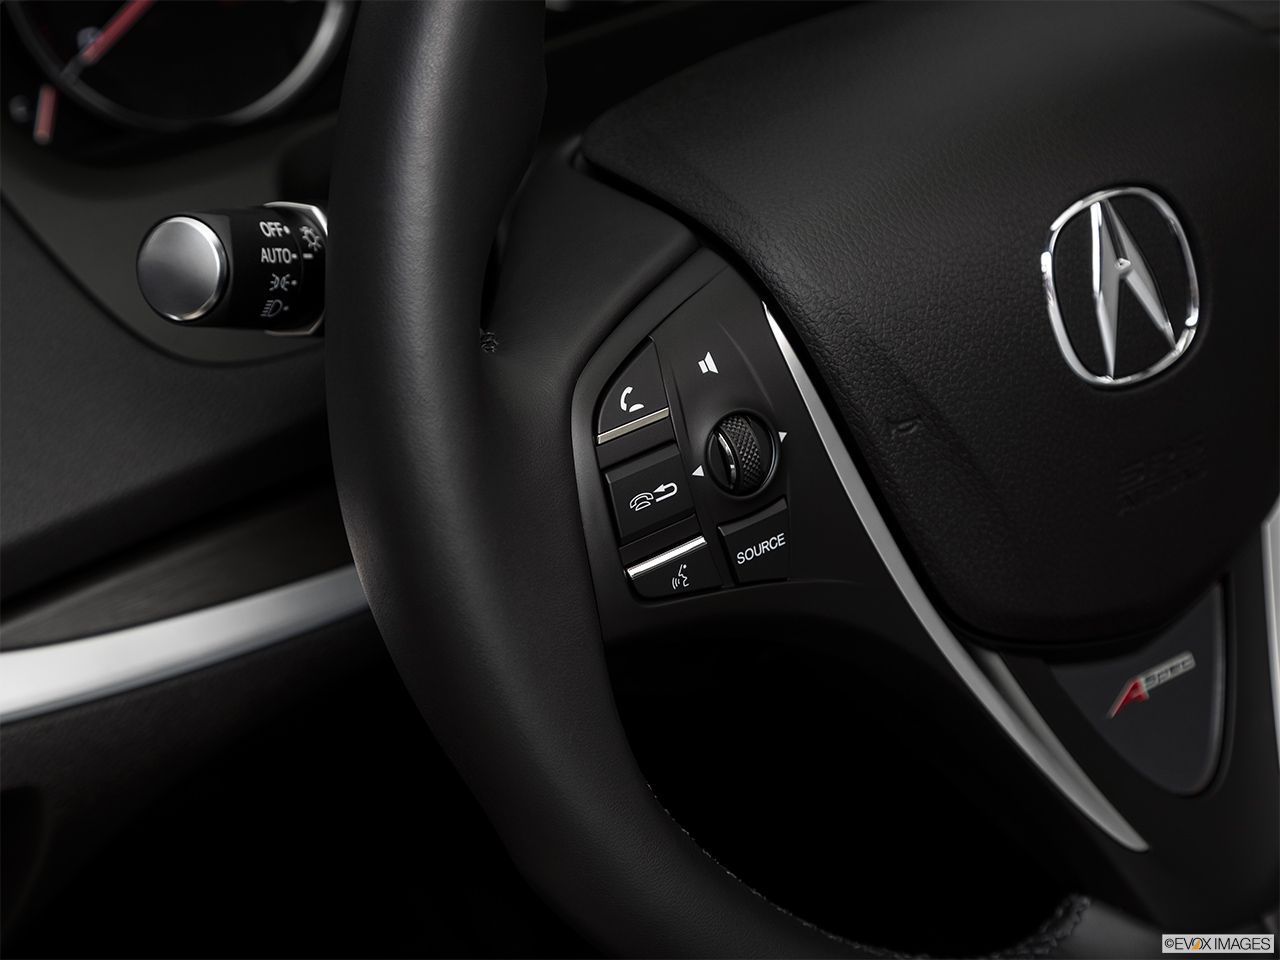 2019 Acura TLX 3.5L Steering Wheel Controls (Left Side) 